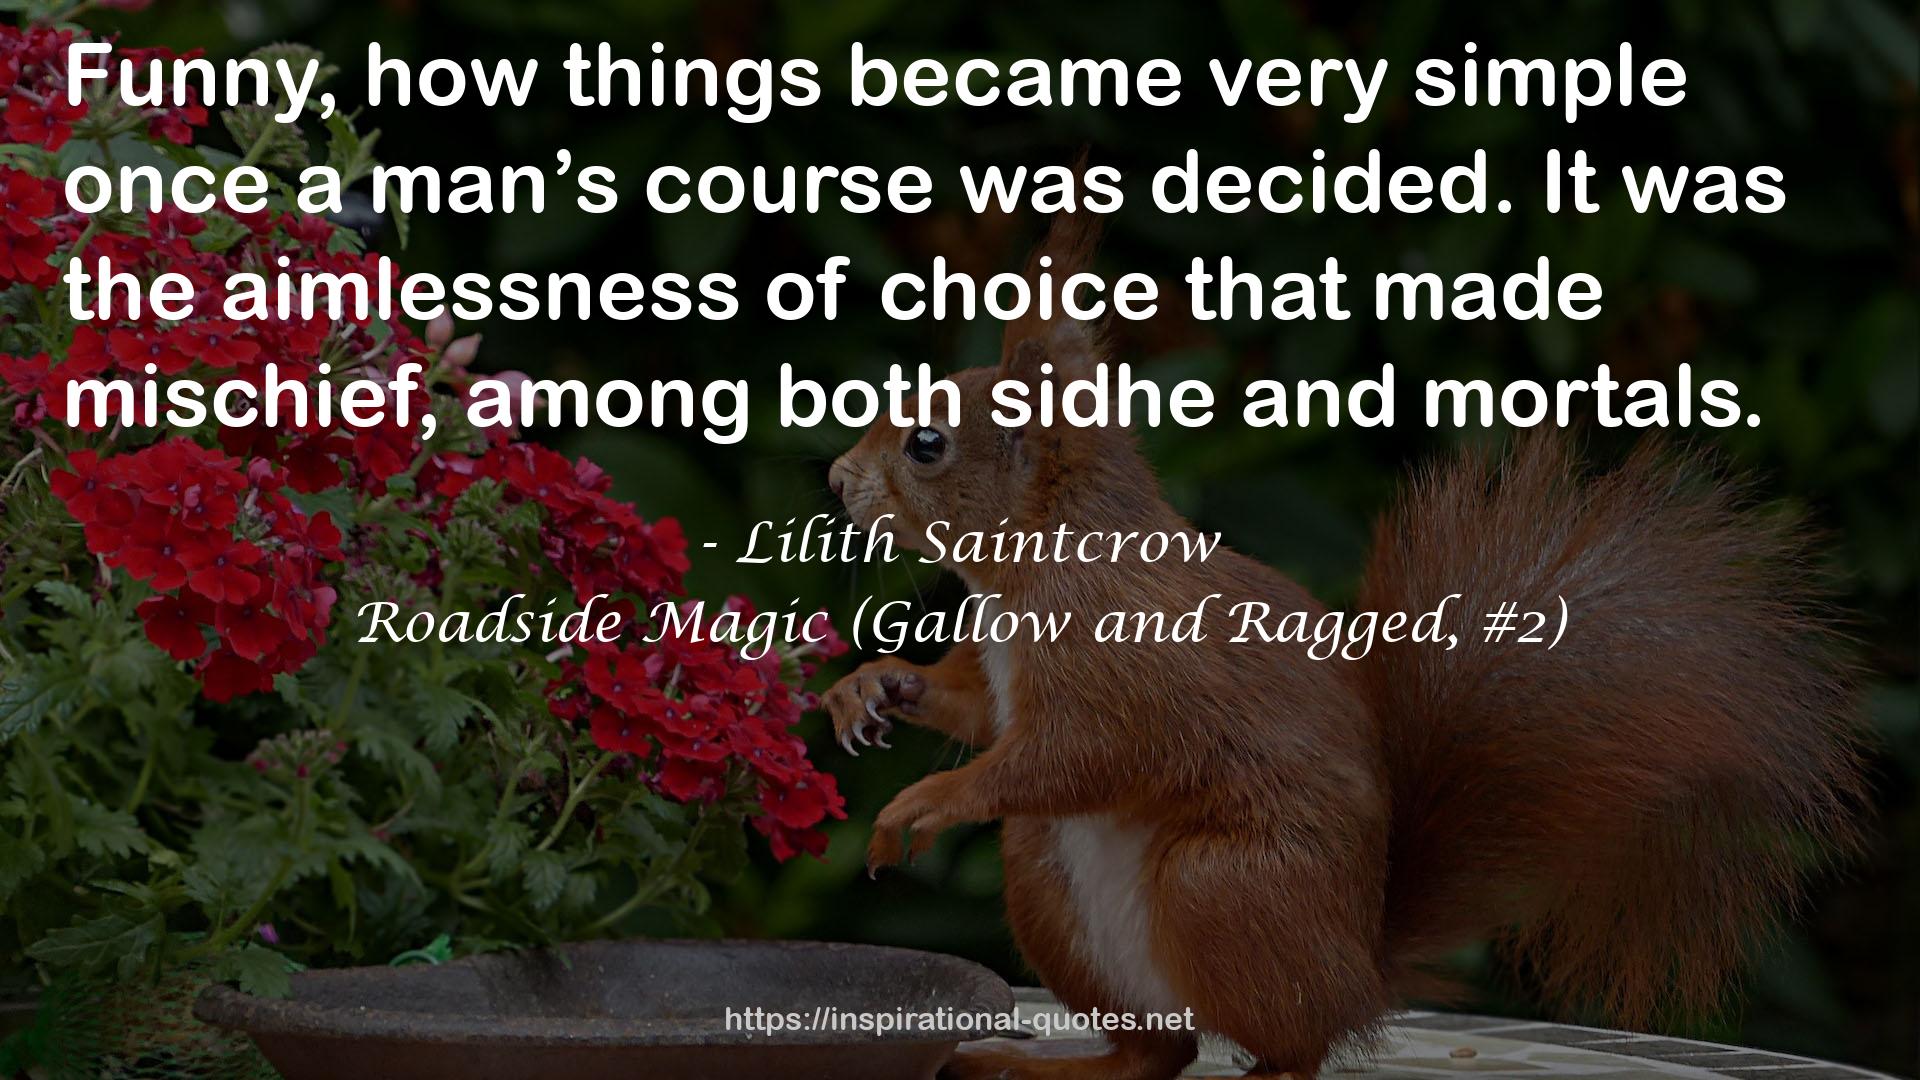 Roadside Magic (Gallow and Ragged, #2) QUOTES